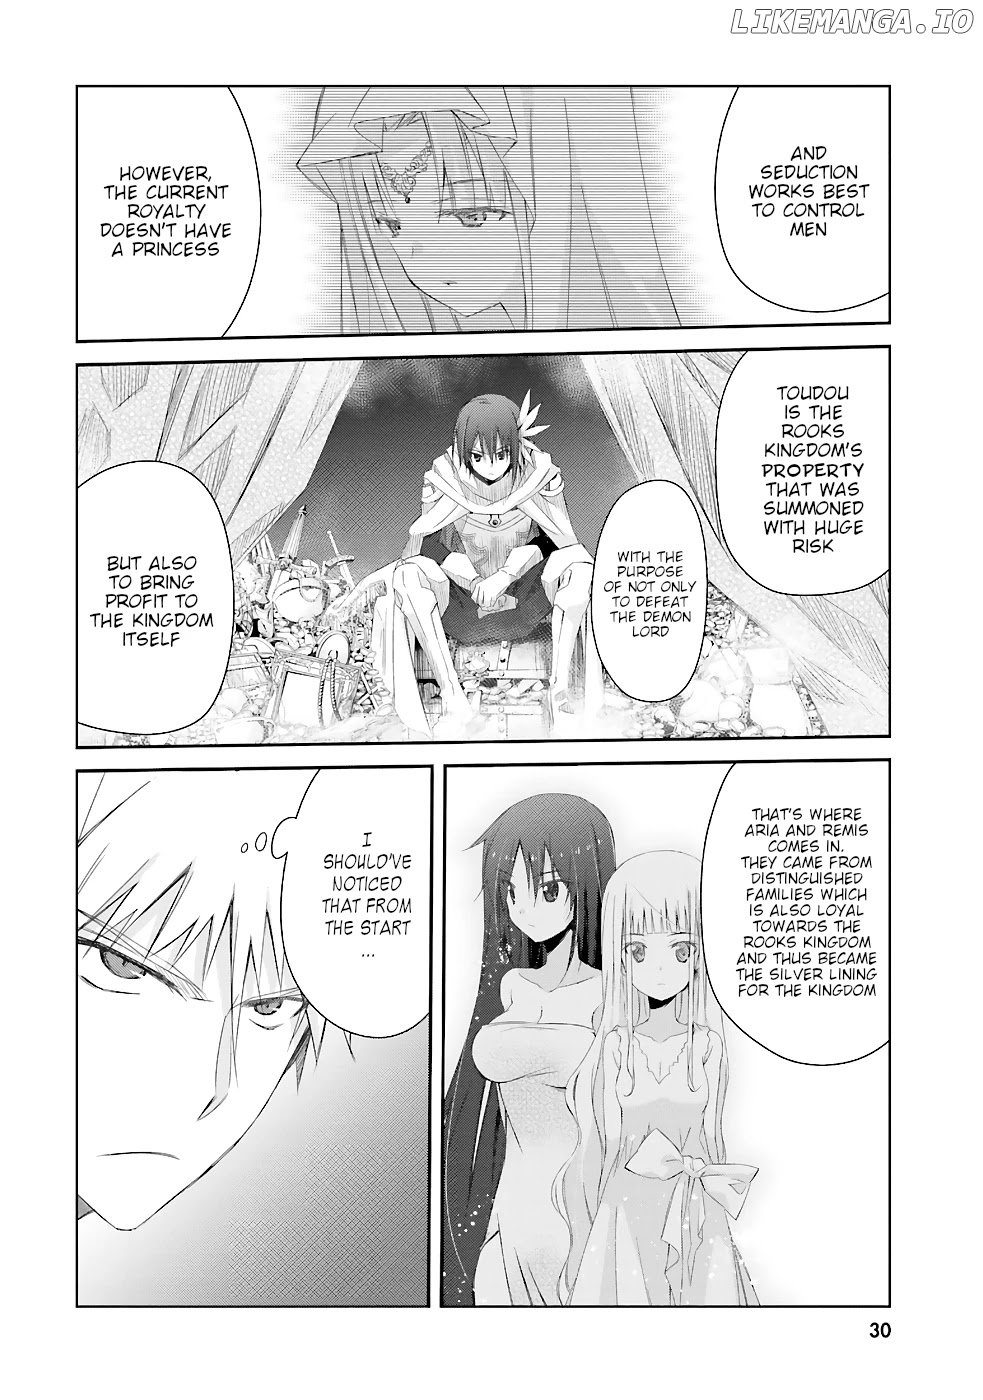 A Simple Task of Providing Support from the Shadows to Defeat the Demon Lord chapter 9 - page 7